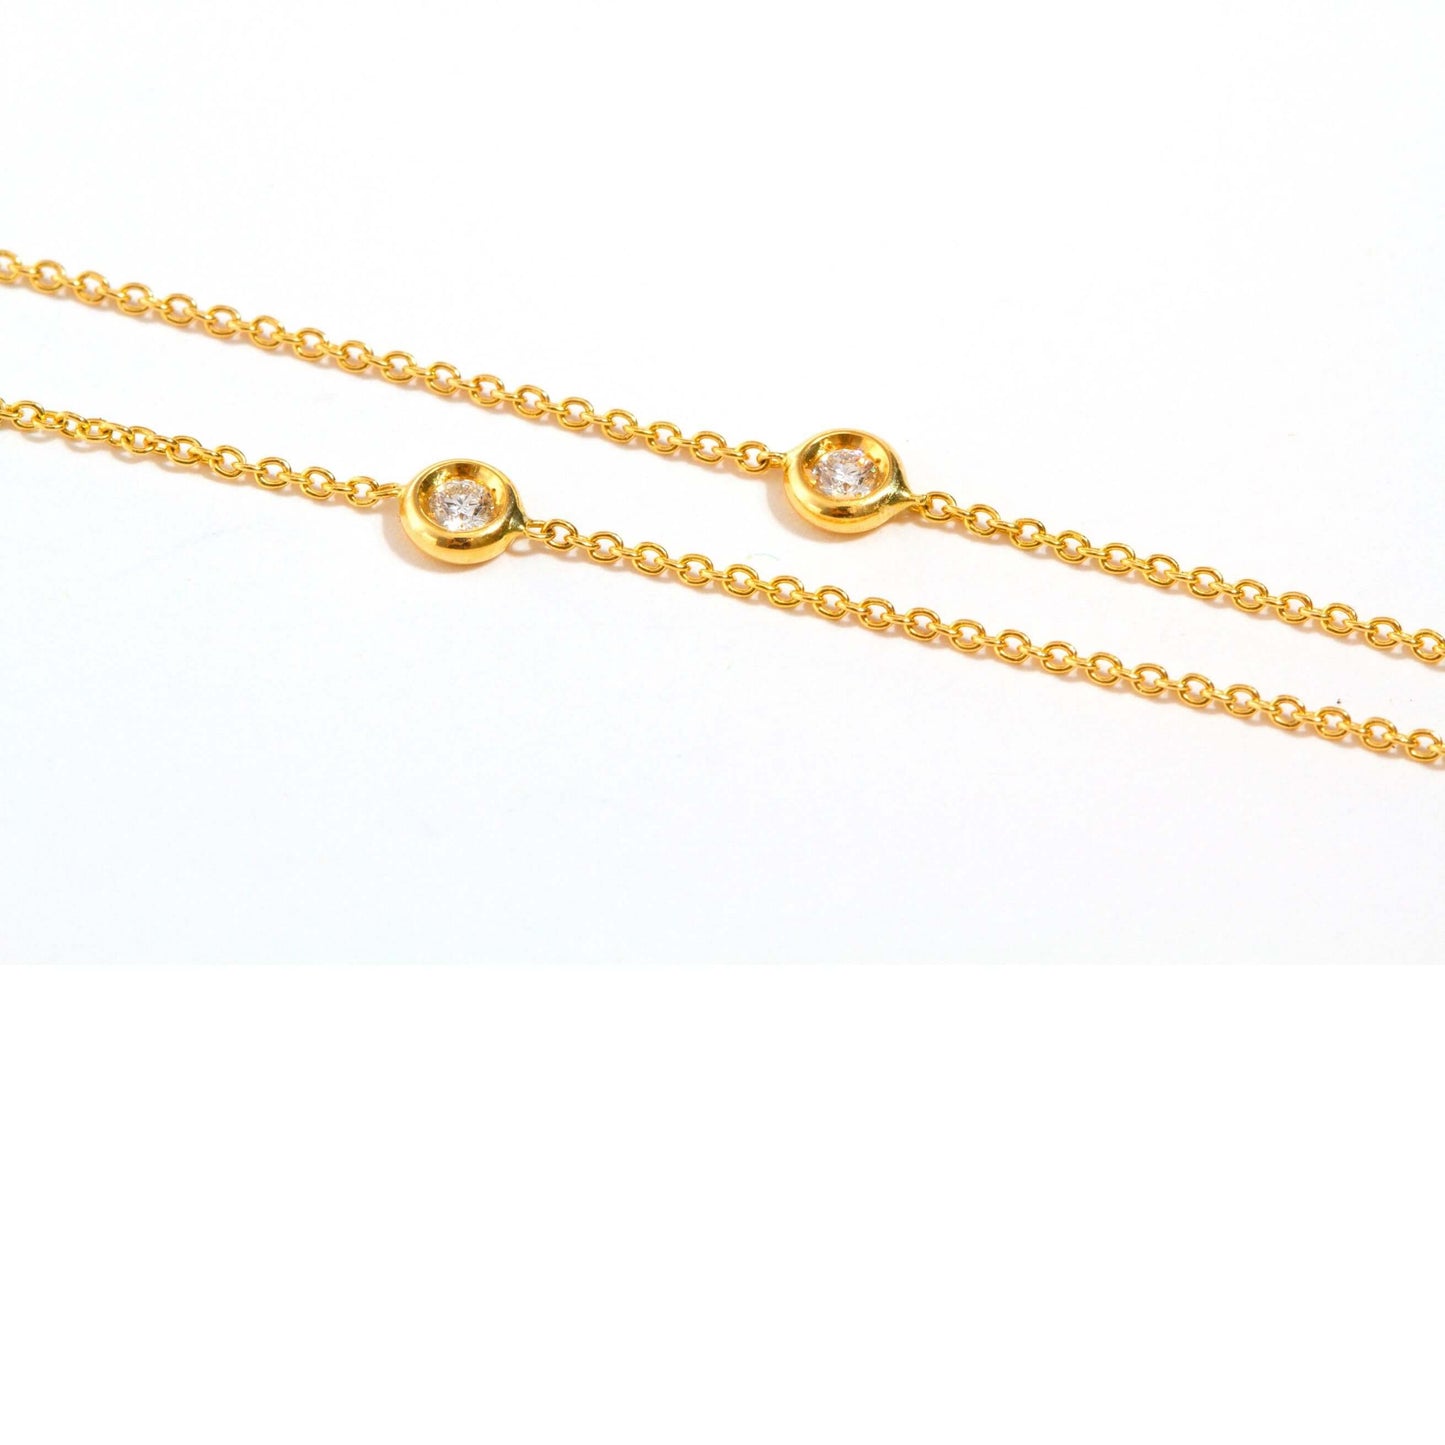 Yellow gold necklace set with white diamonds - LaParra Jewels-bespoke and one of a kind fine jewellery-london